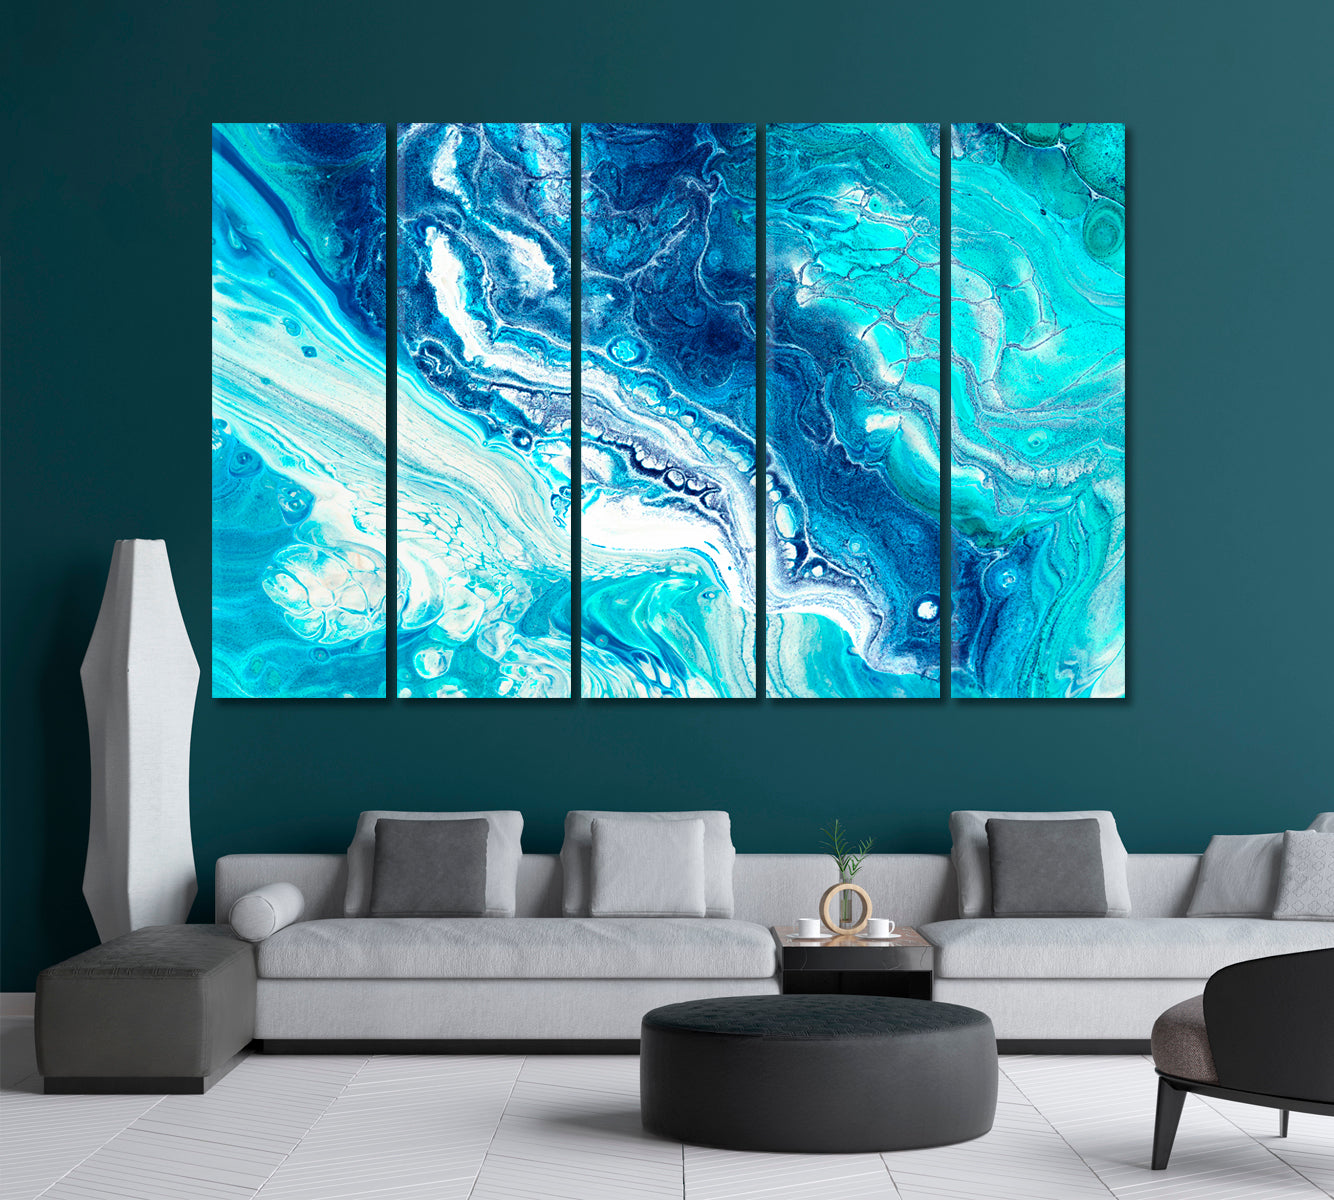 Creative Abstract Bubbles with Blue Swirls Canvas Print-Canvas Print-CetArt-5 Panels-36x24 inches-CetArt